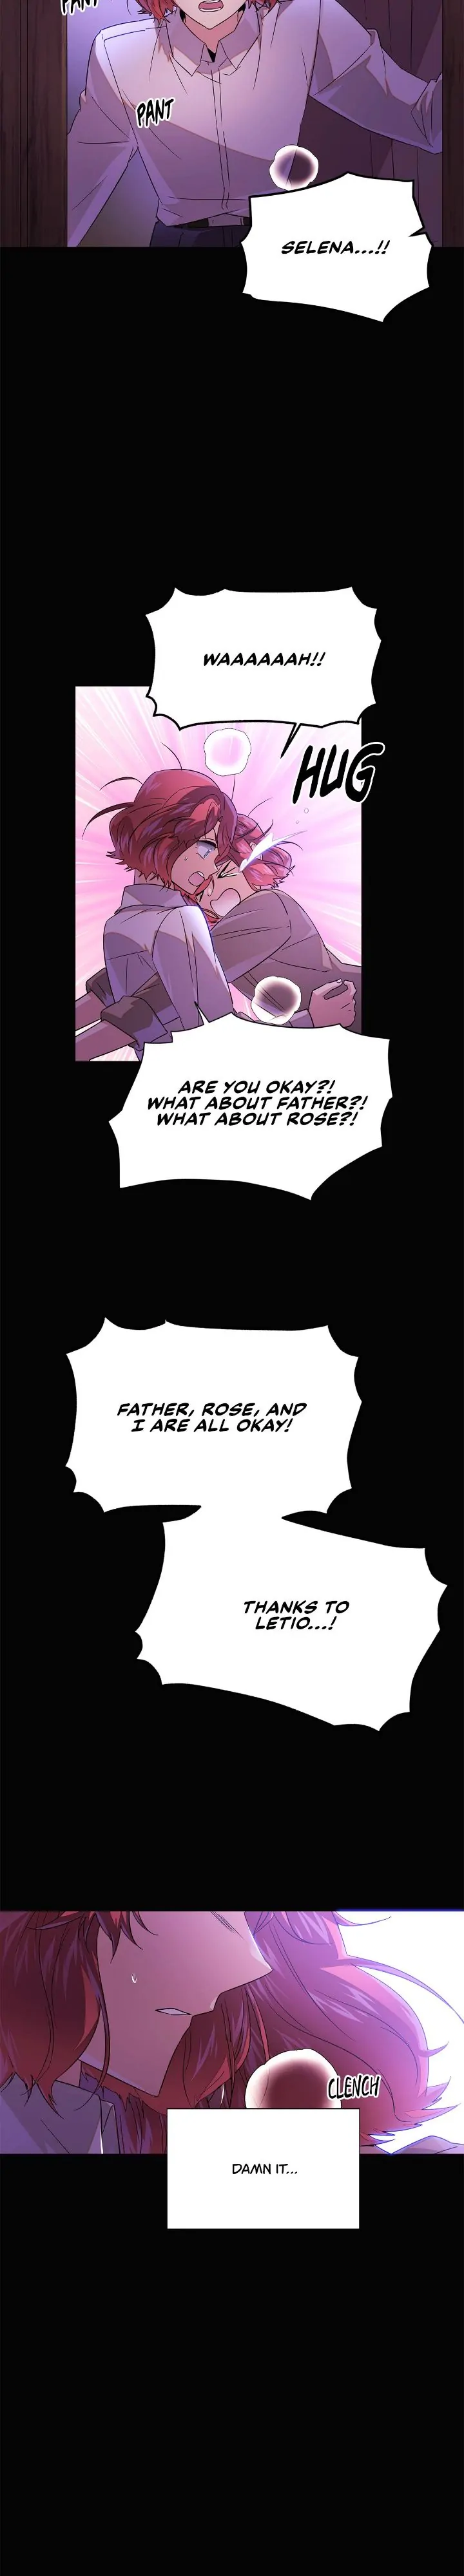 The Villain Discovered My Identity - Chapter 126 Page 7